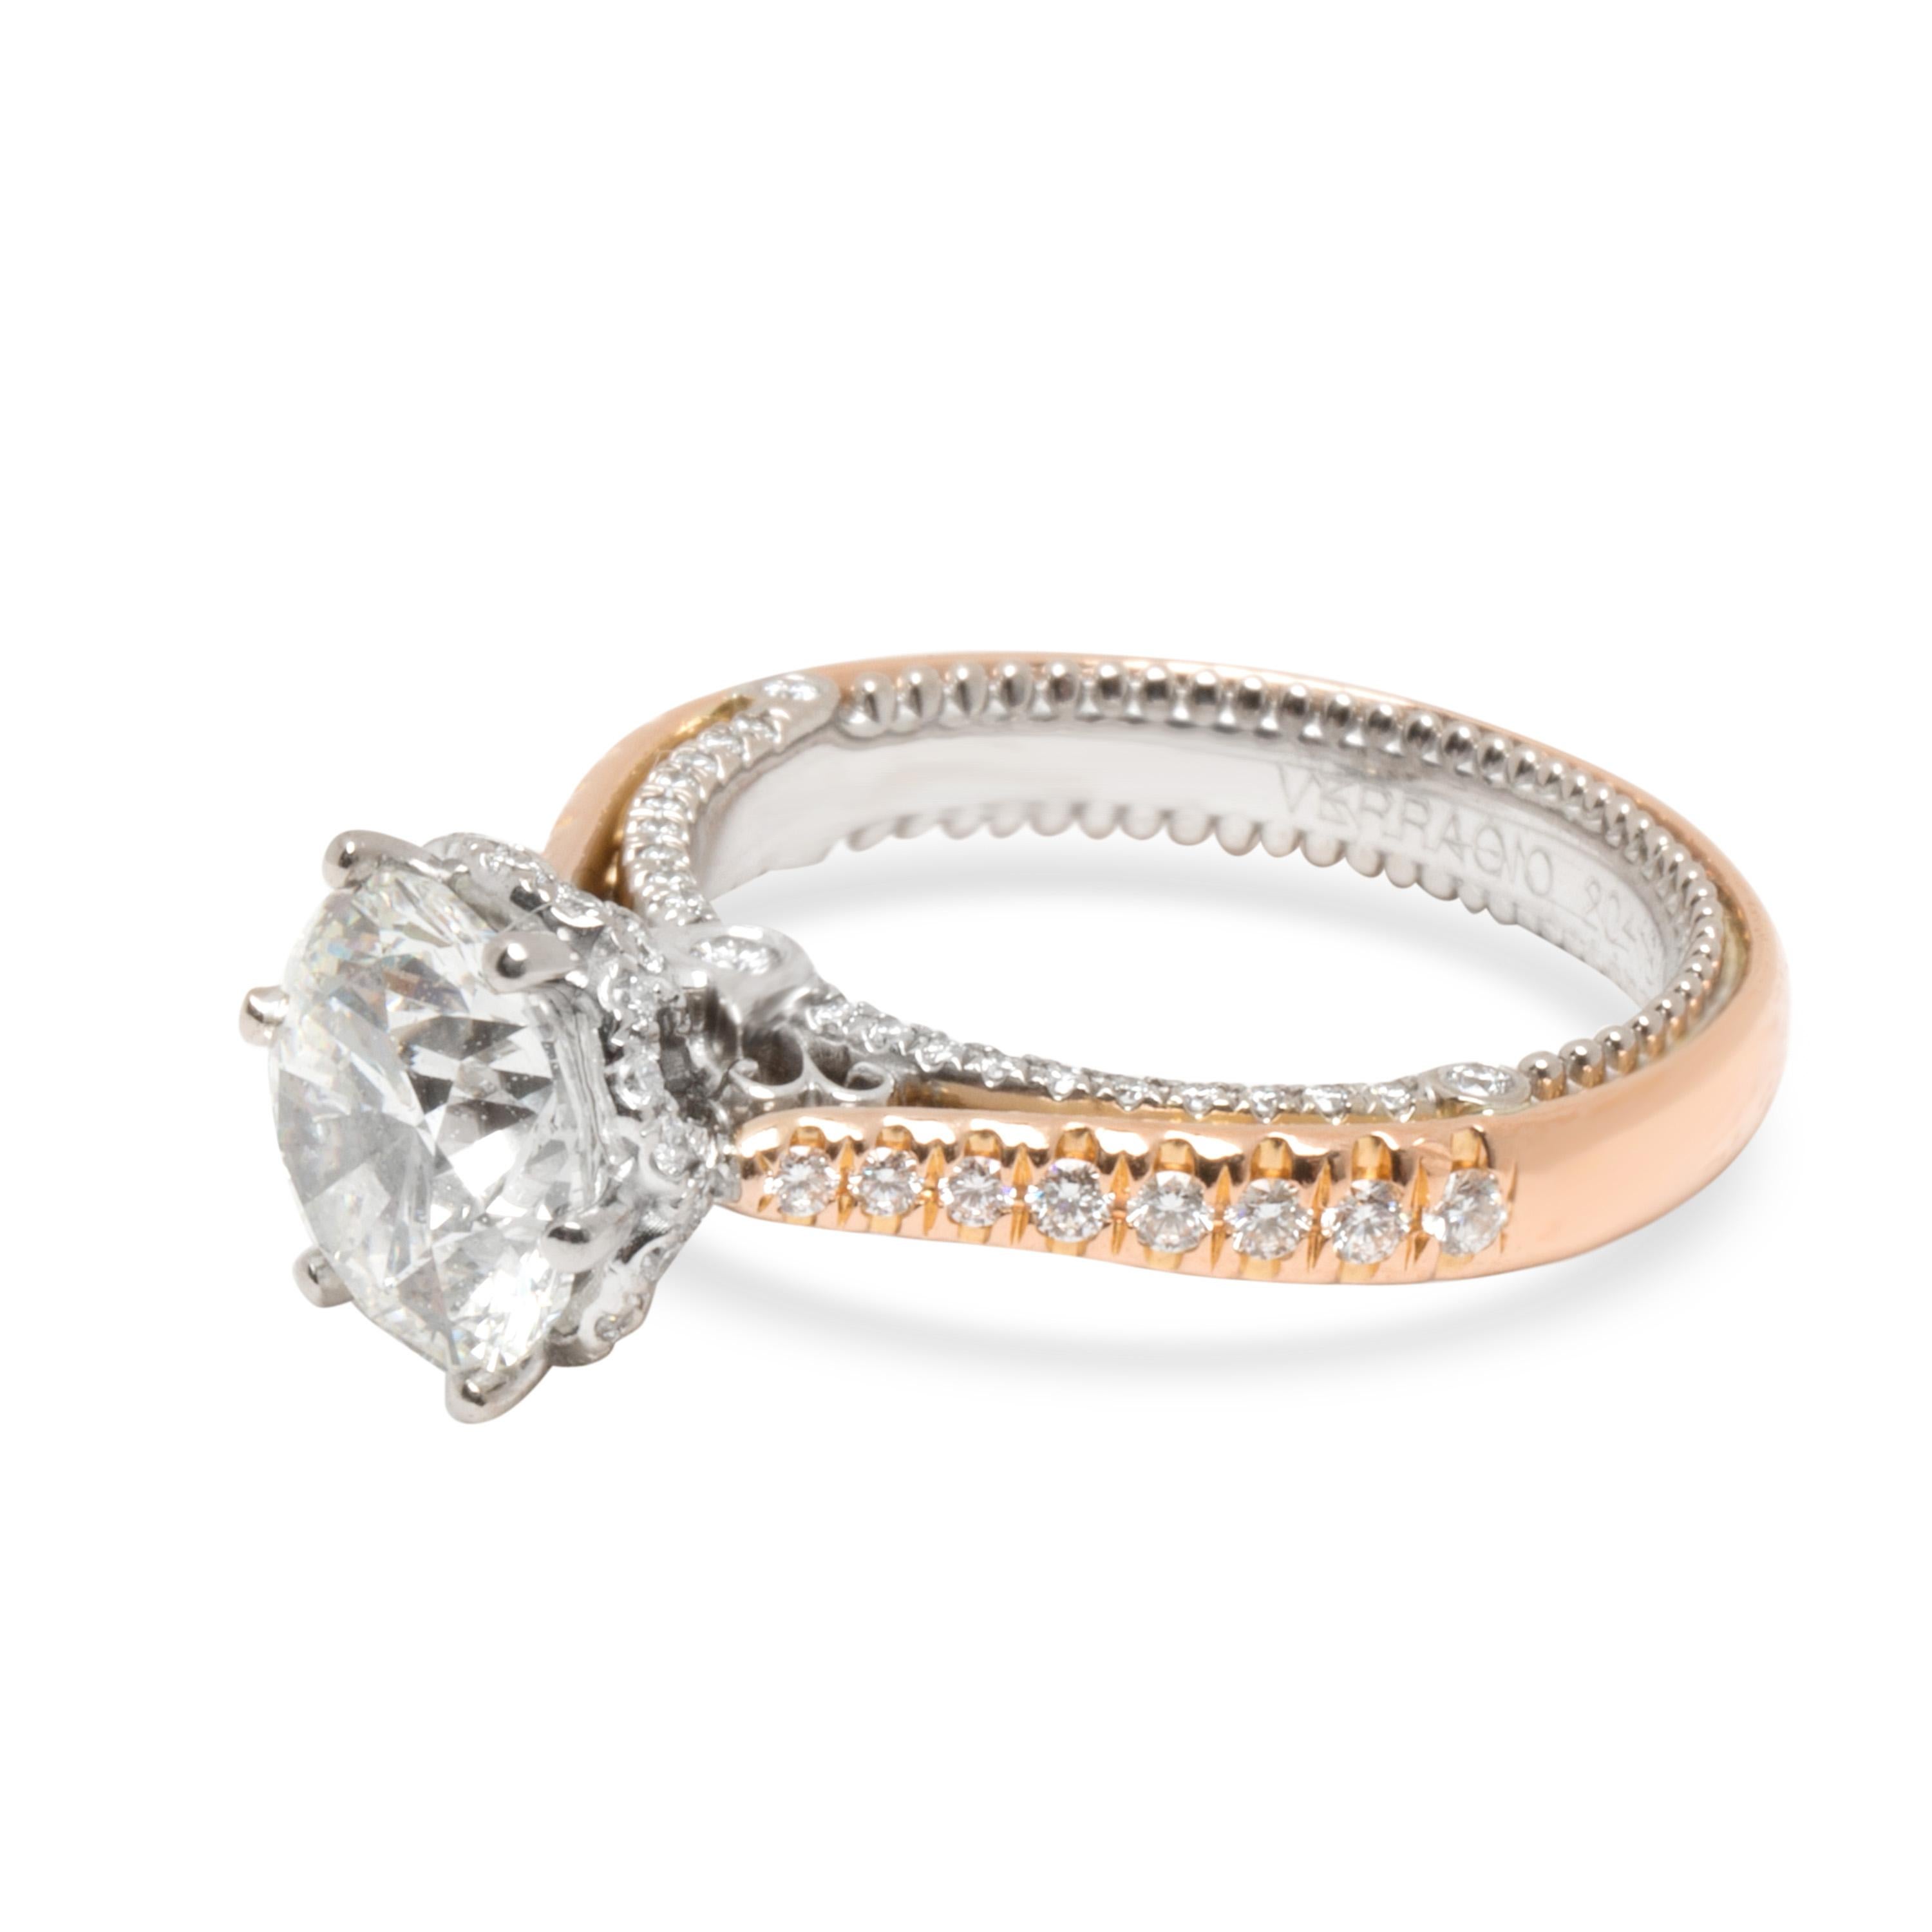 Round Cut GIA Certified Verragio Diamond Engagement Ring in 2-Tone Gold '2.02 Carat H/SI2'